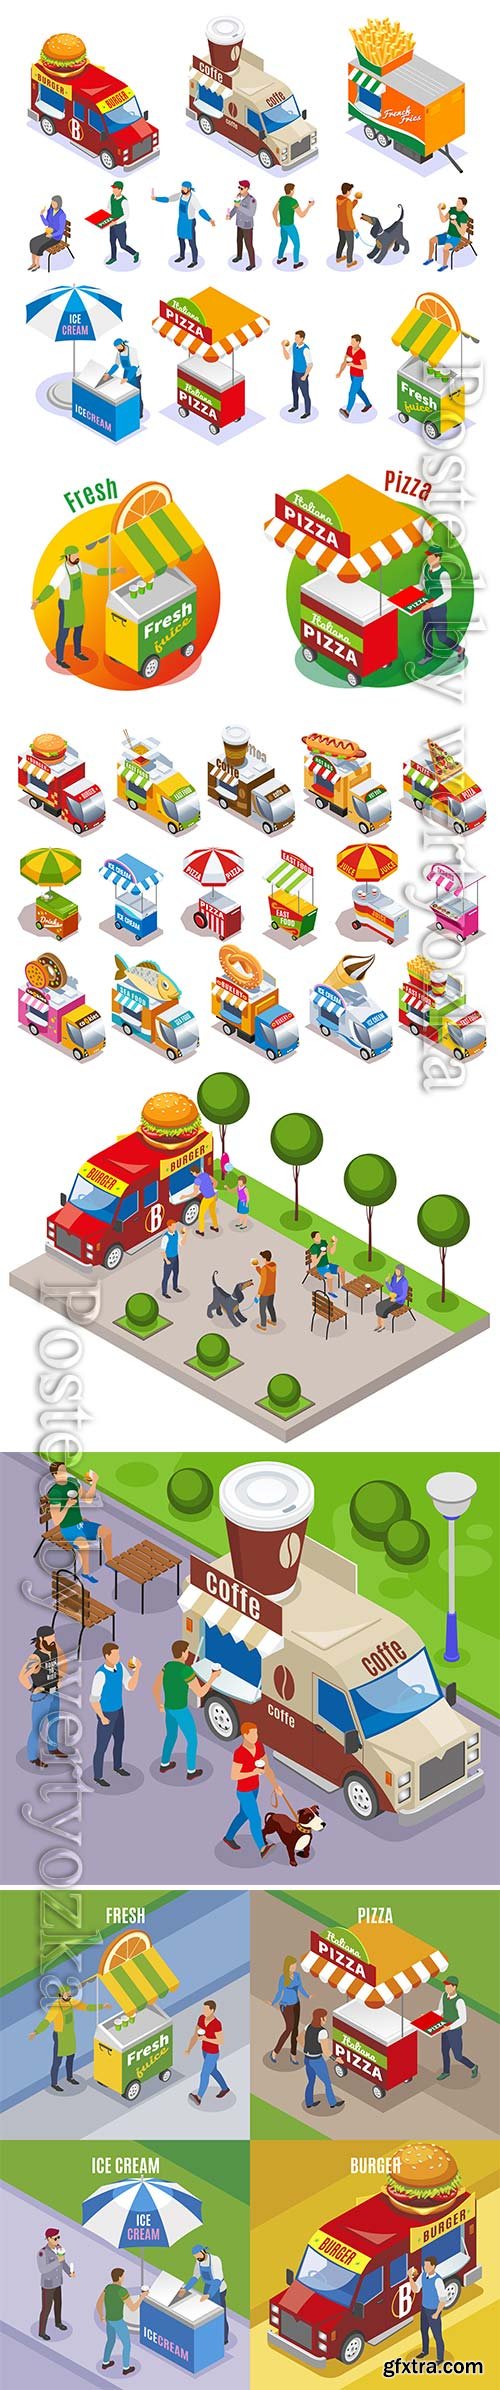 Street food carts and vehicle sellers and customers isometric icons set